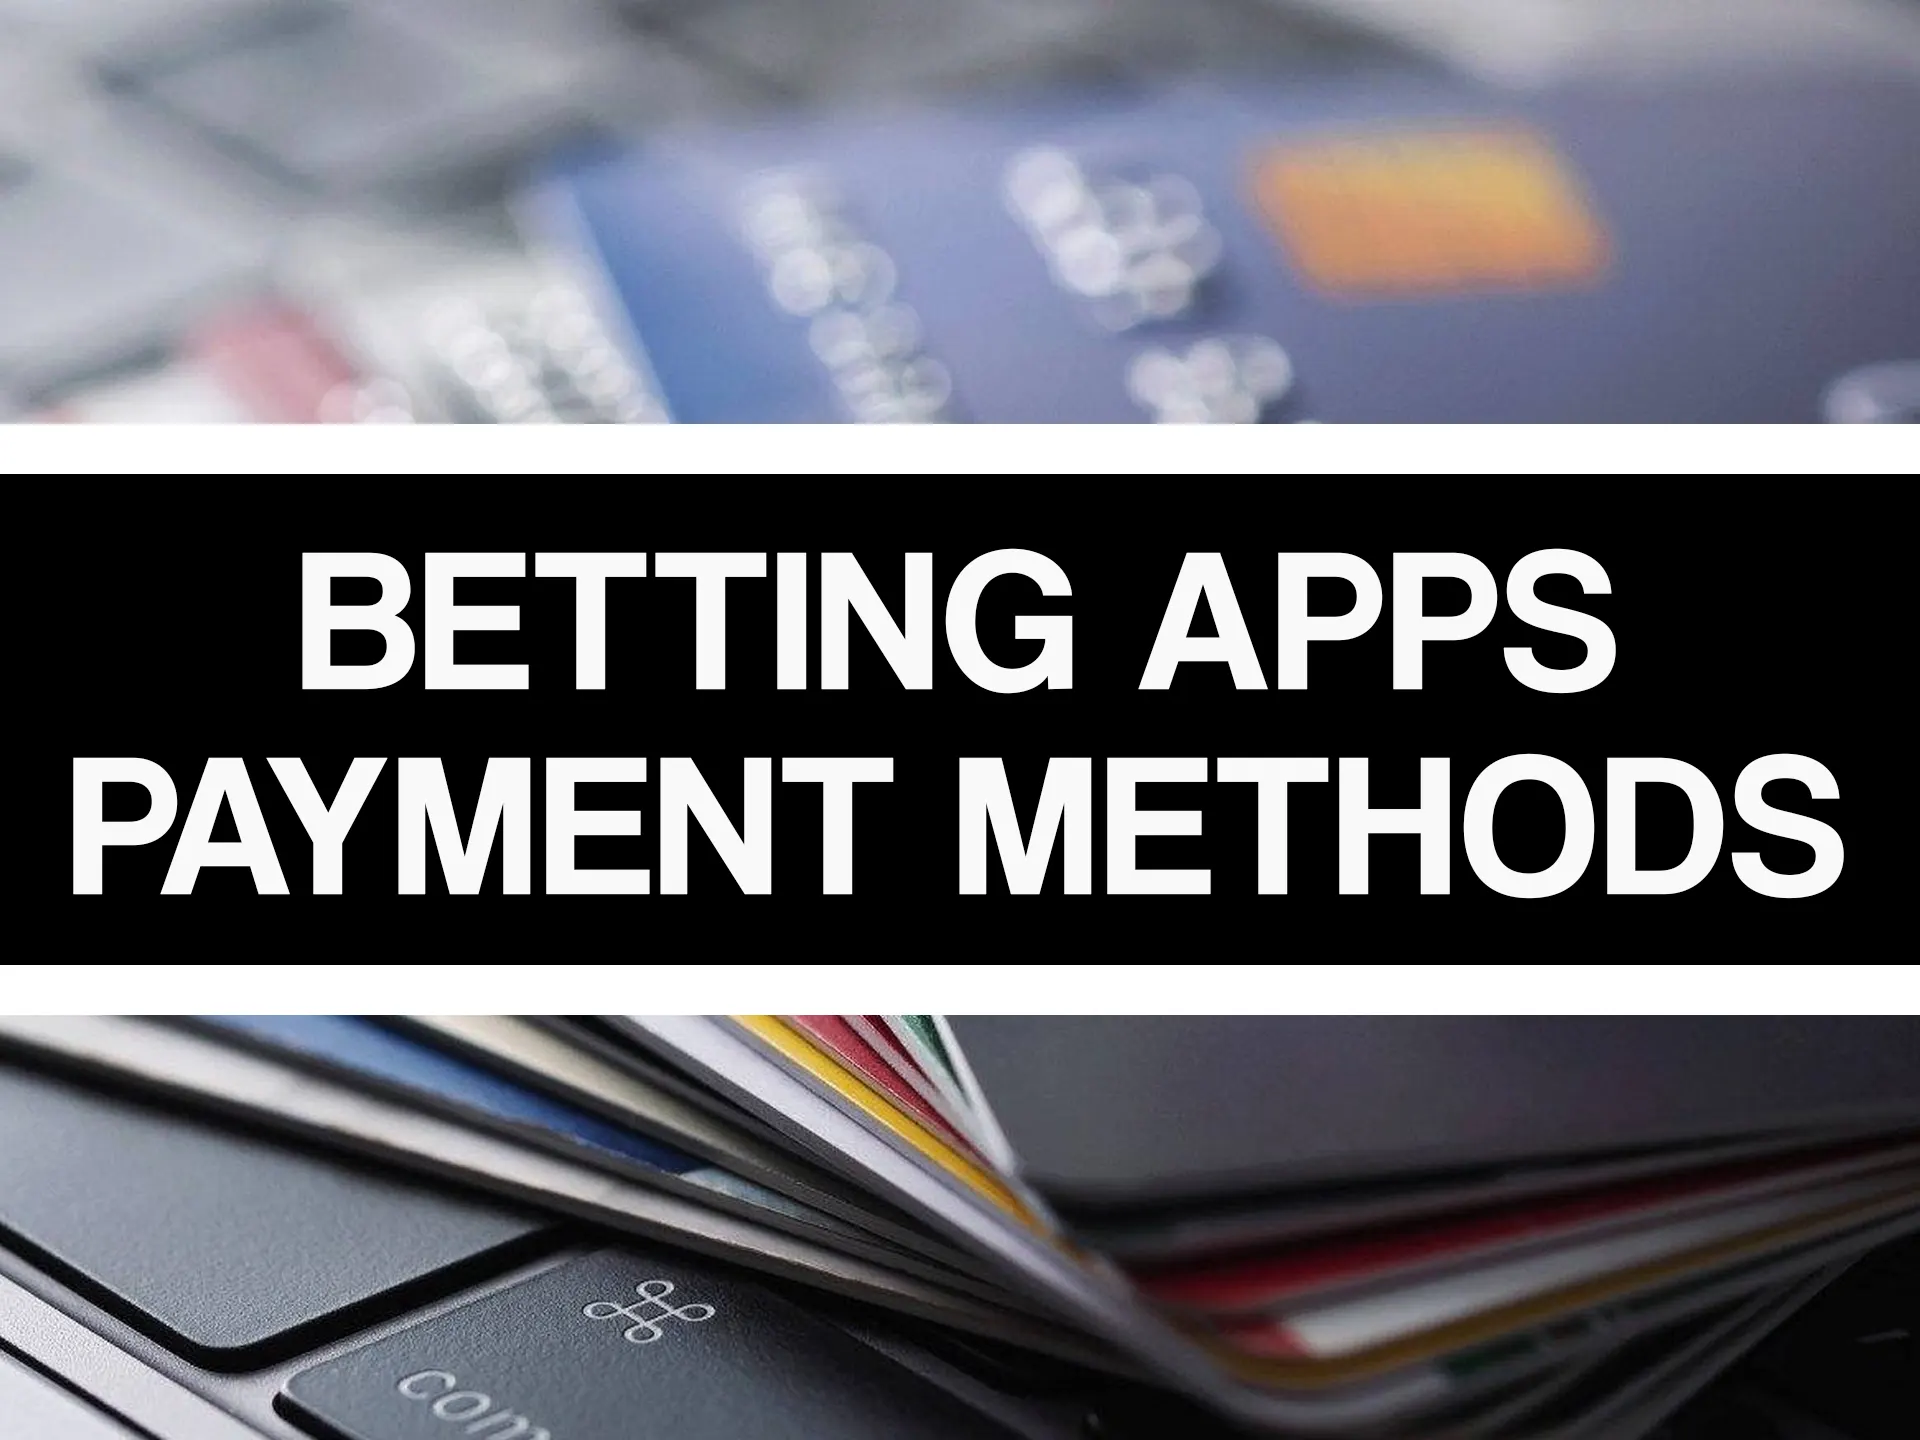 Make payments using your favorite payment methods to make bets.